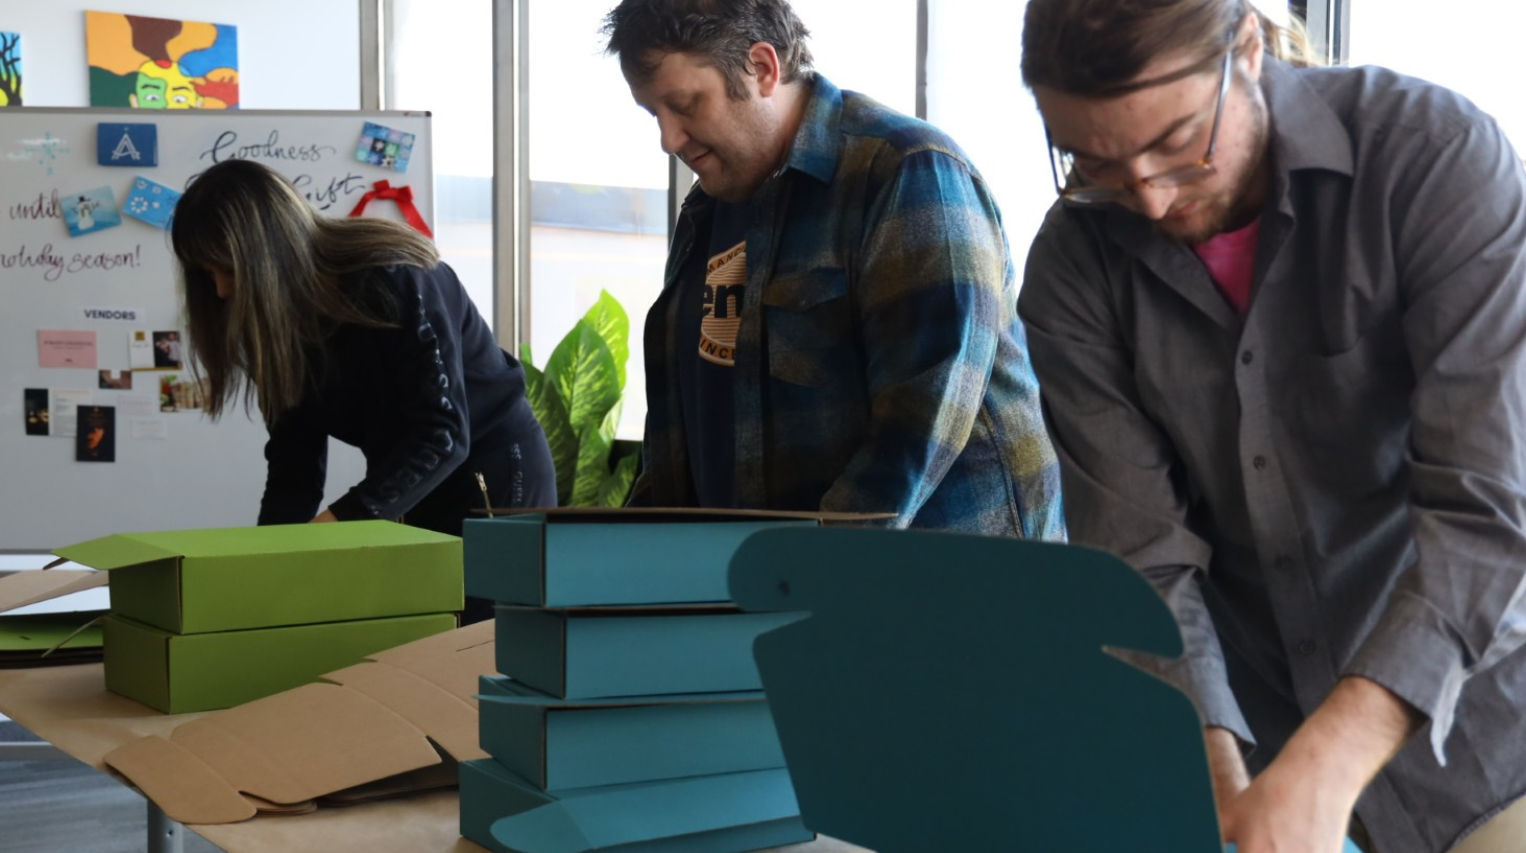 Three people are actively engaged in assembling gift boxes in a bright, indoor setting. Stacks of flat, teal and green box pieces are being crafted into three-dimensional shapes on a long table. A display board in the background features a cheerful notice about the holiday season, suggesting a festive, community-driven event.